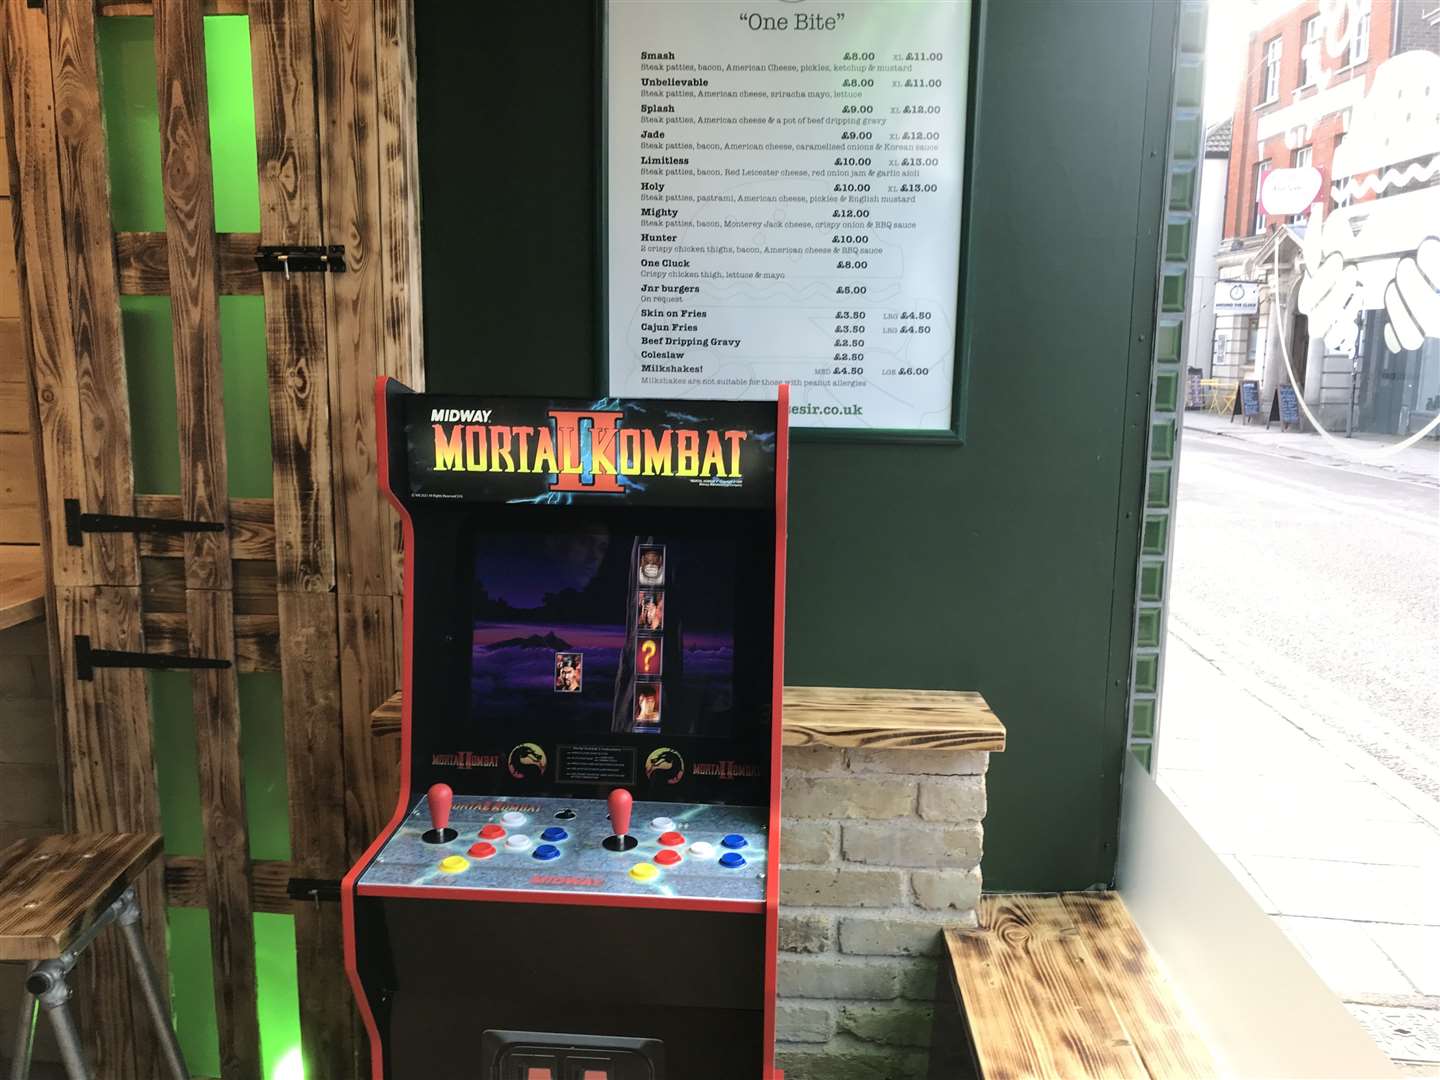 The old arcade machine sits in the corner waiting to be played by anyone with the time